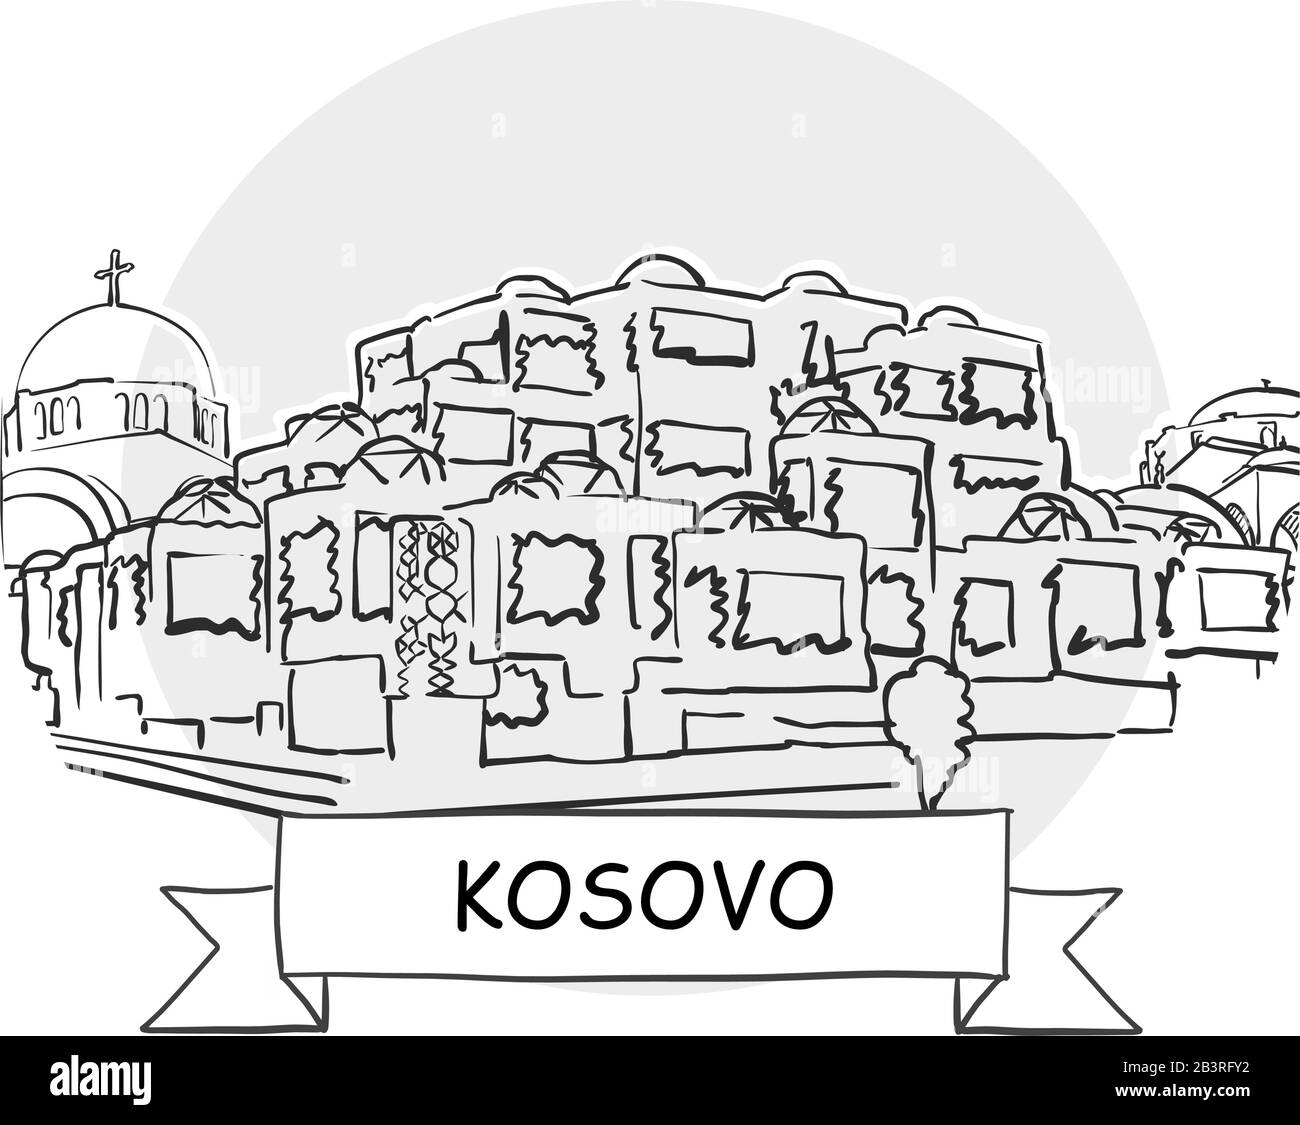 Kosovo Hand-Drawn Urban Vector Sign. Black Line Art Illustration with Ribbon and Title. Stock Vector